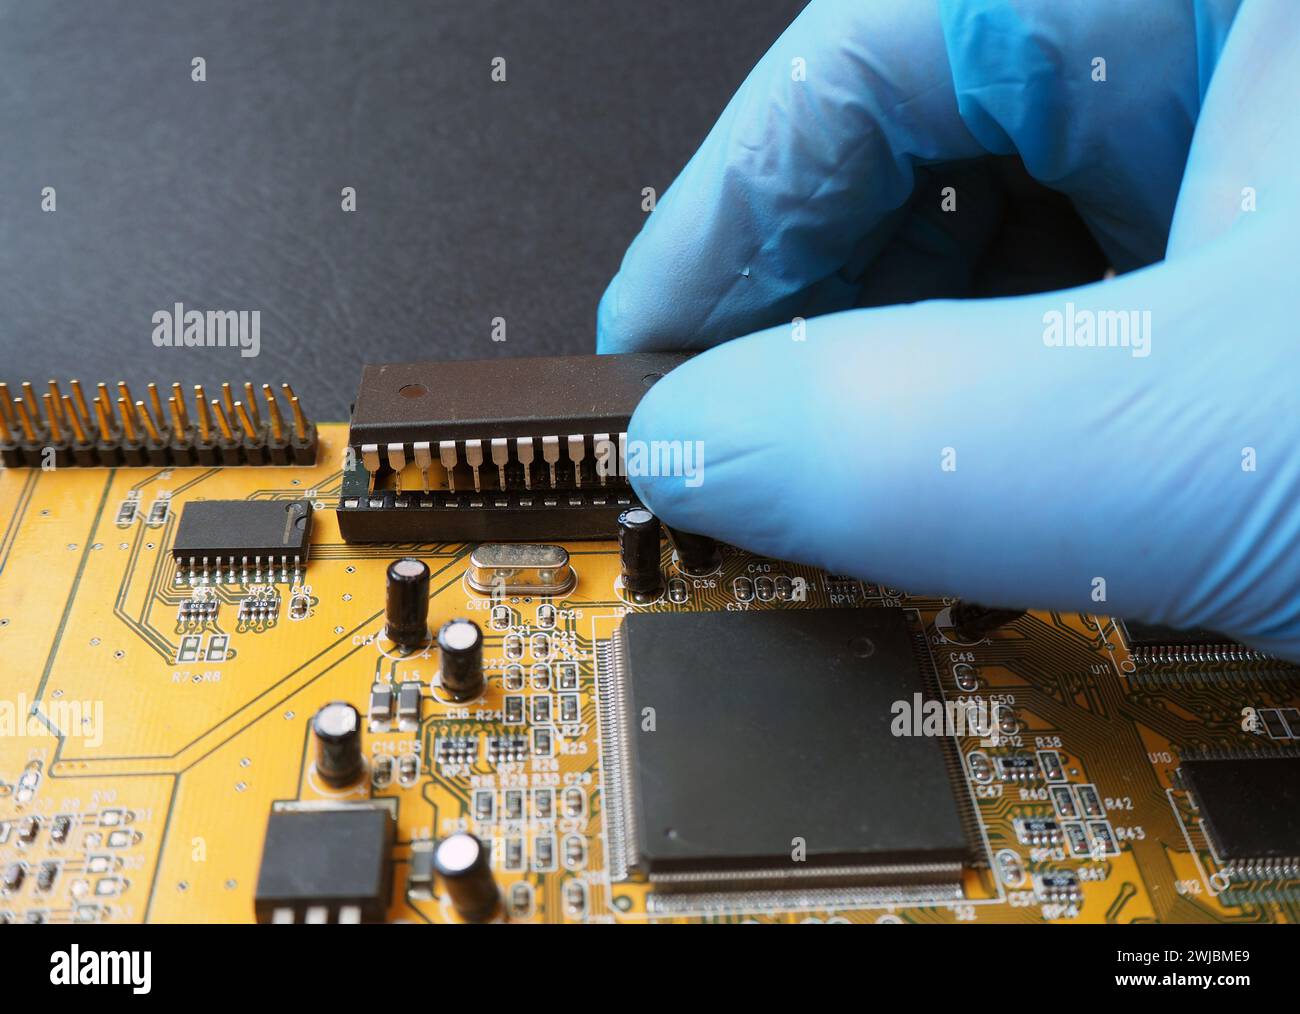 Removing an Integrated Circuit (IC) from the dip socket.   Semiconductor components on the electronic board. Stock Photo